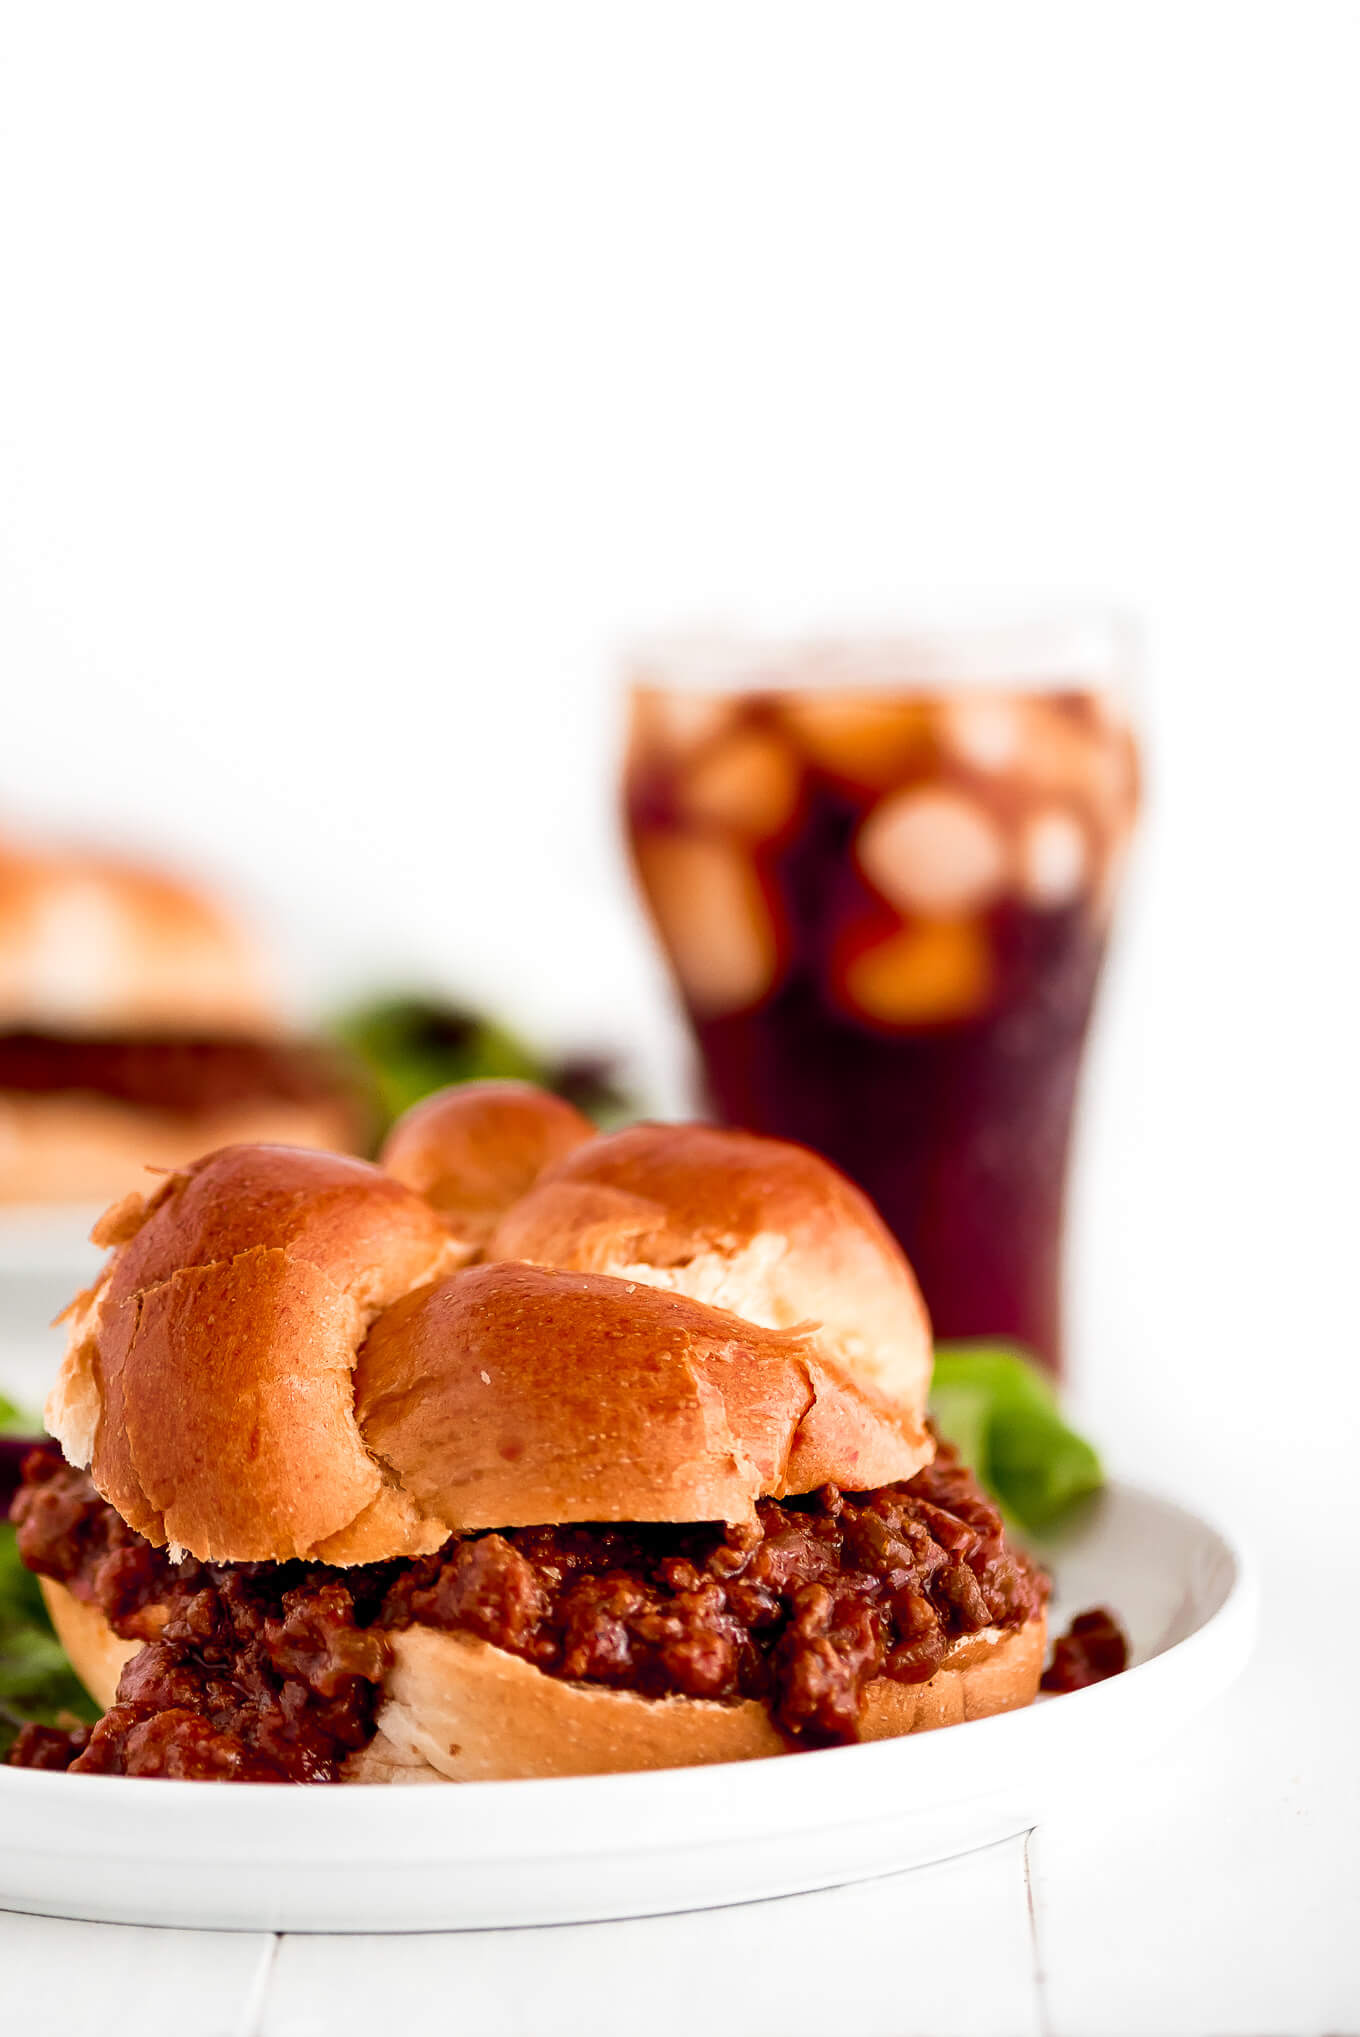 Instant Pot Sloppy Joes on a challah bun with a soda in the background.